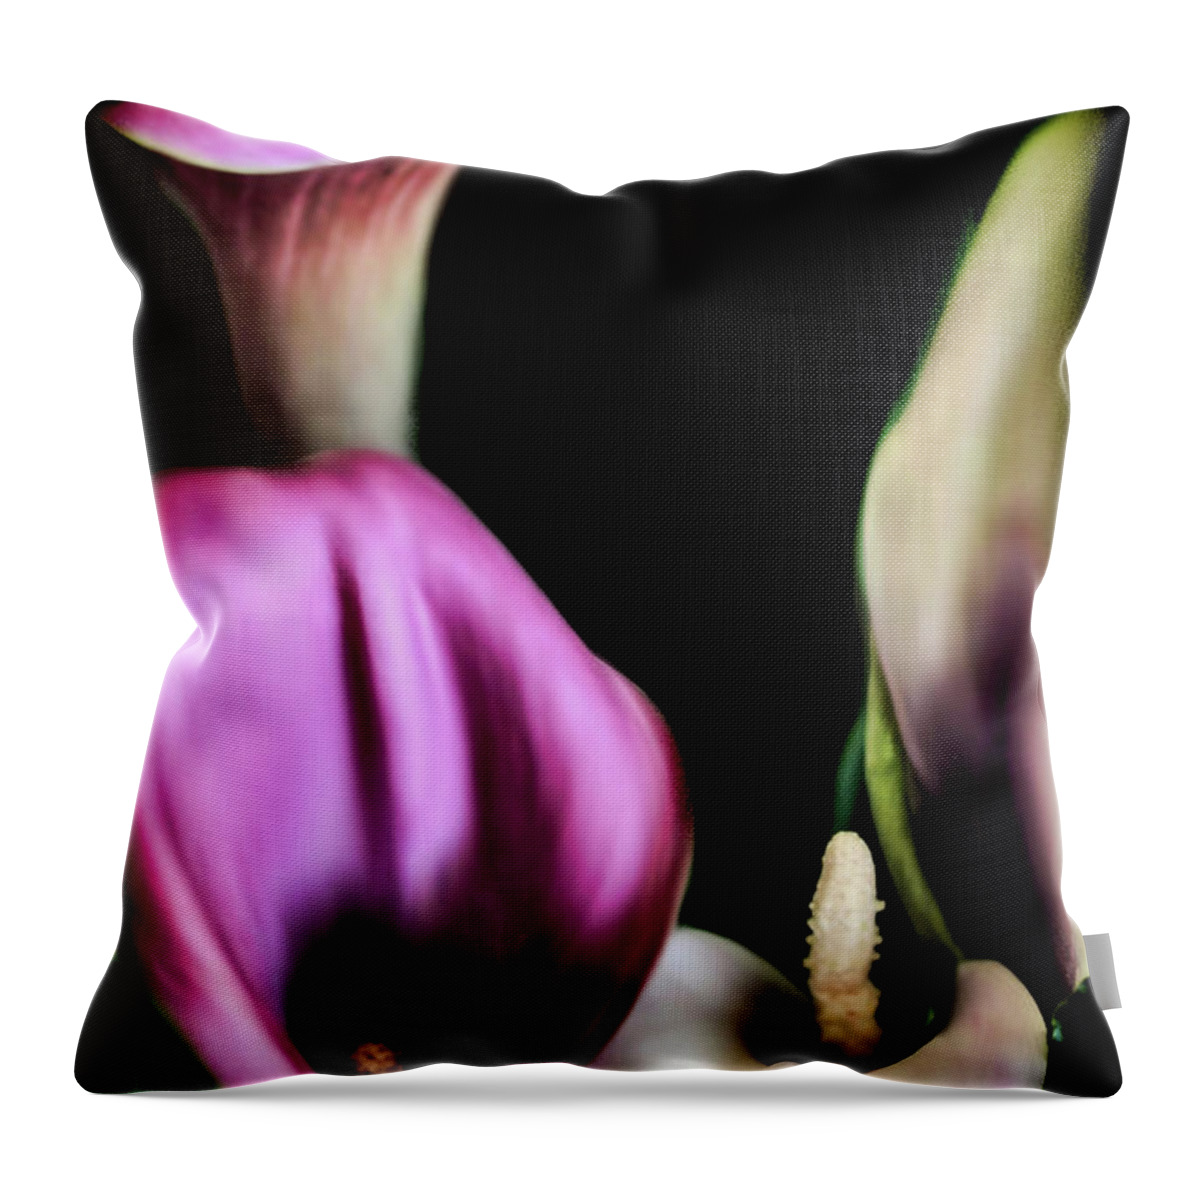 Calla Lilies Throw Pillow featuring the photograph The Three Calla Lilies by Sally Bauer